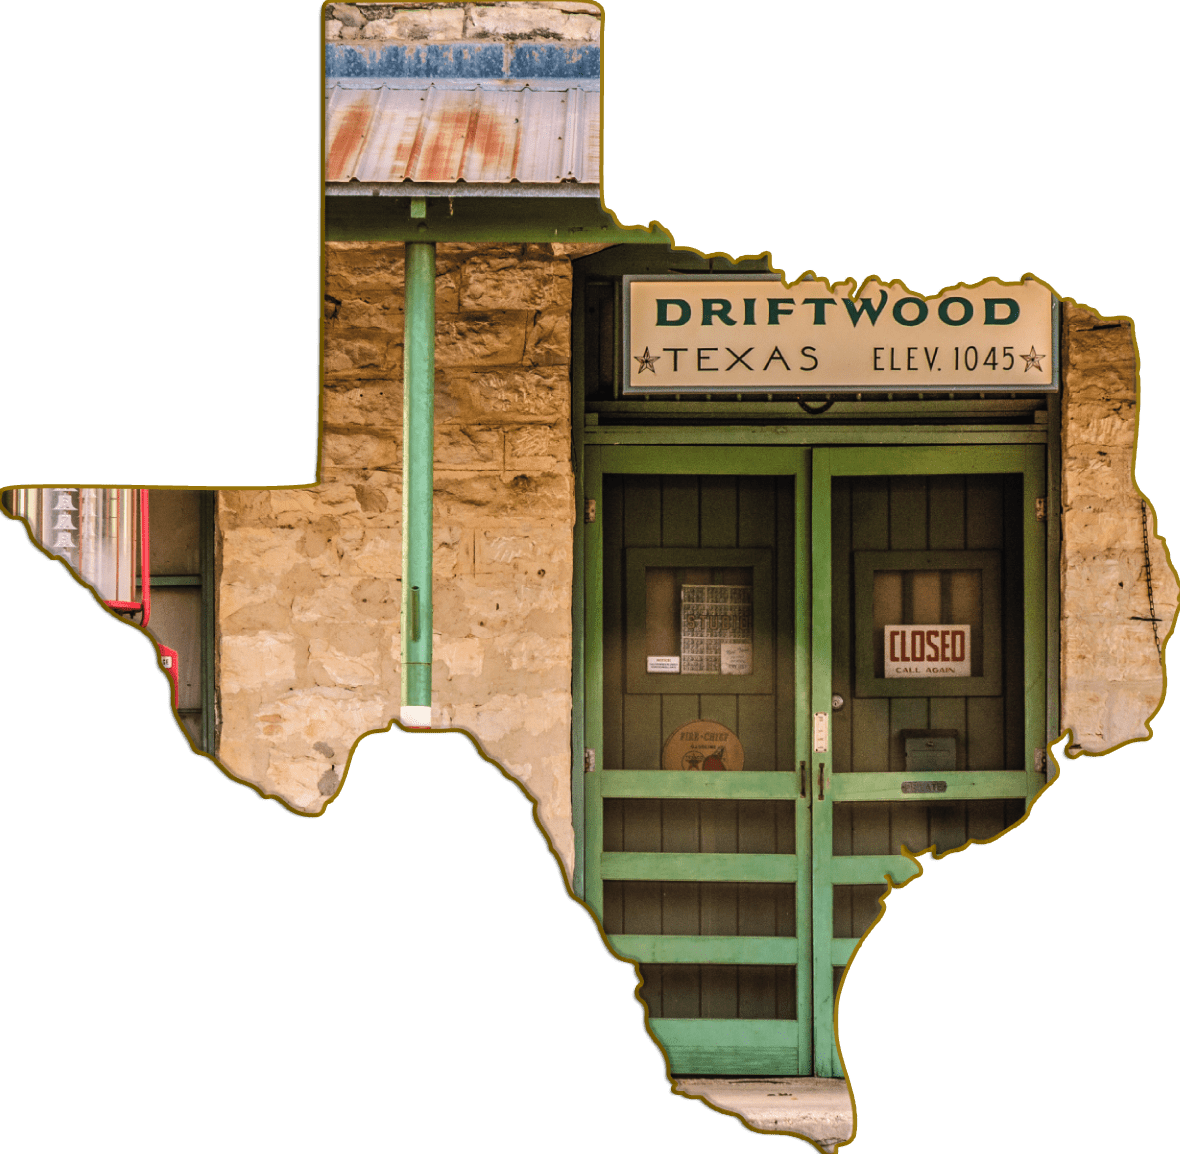 Wimberley Puzzle Company Refrigerator Magnets Driftwood Texas Gas Station | Texas-Shaped Magnet